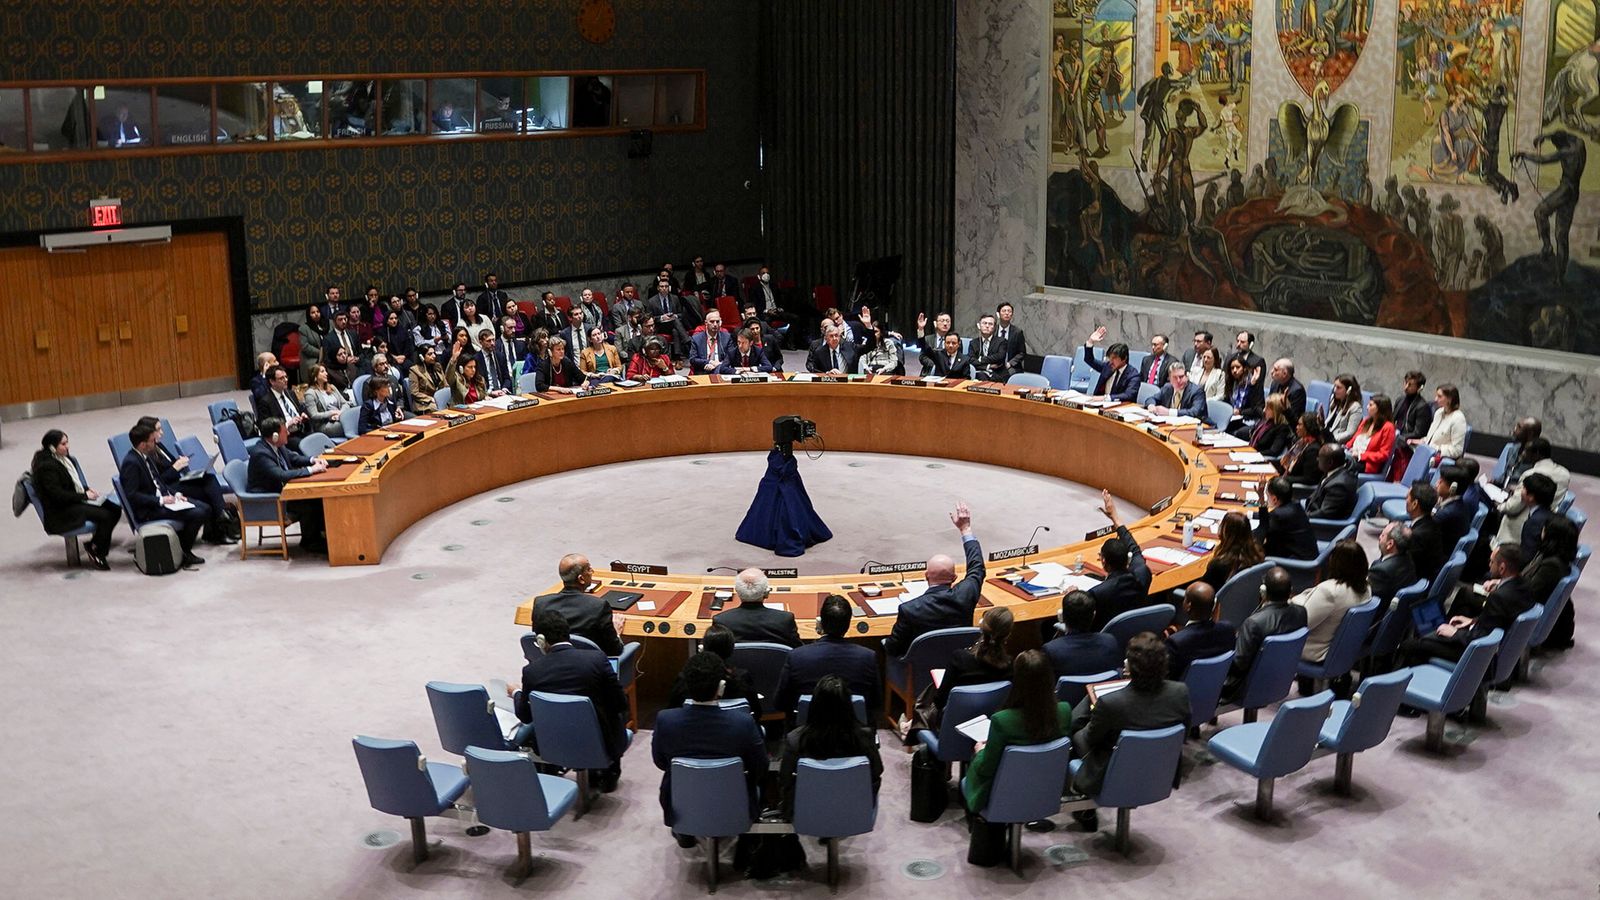 UN Security Council agrees resolution to speed up Gaza aid - but omits call for urgent ceasefire